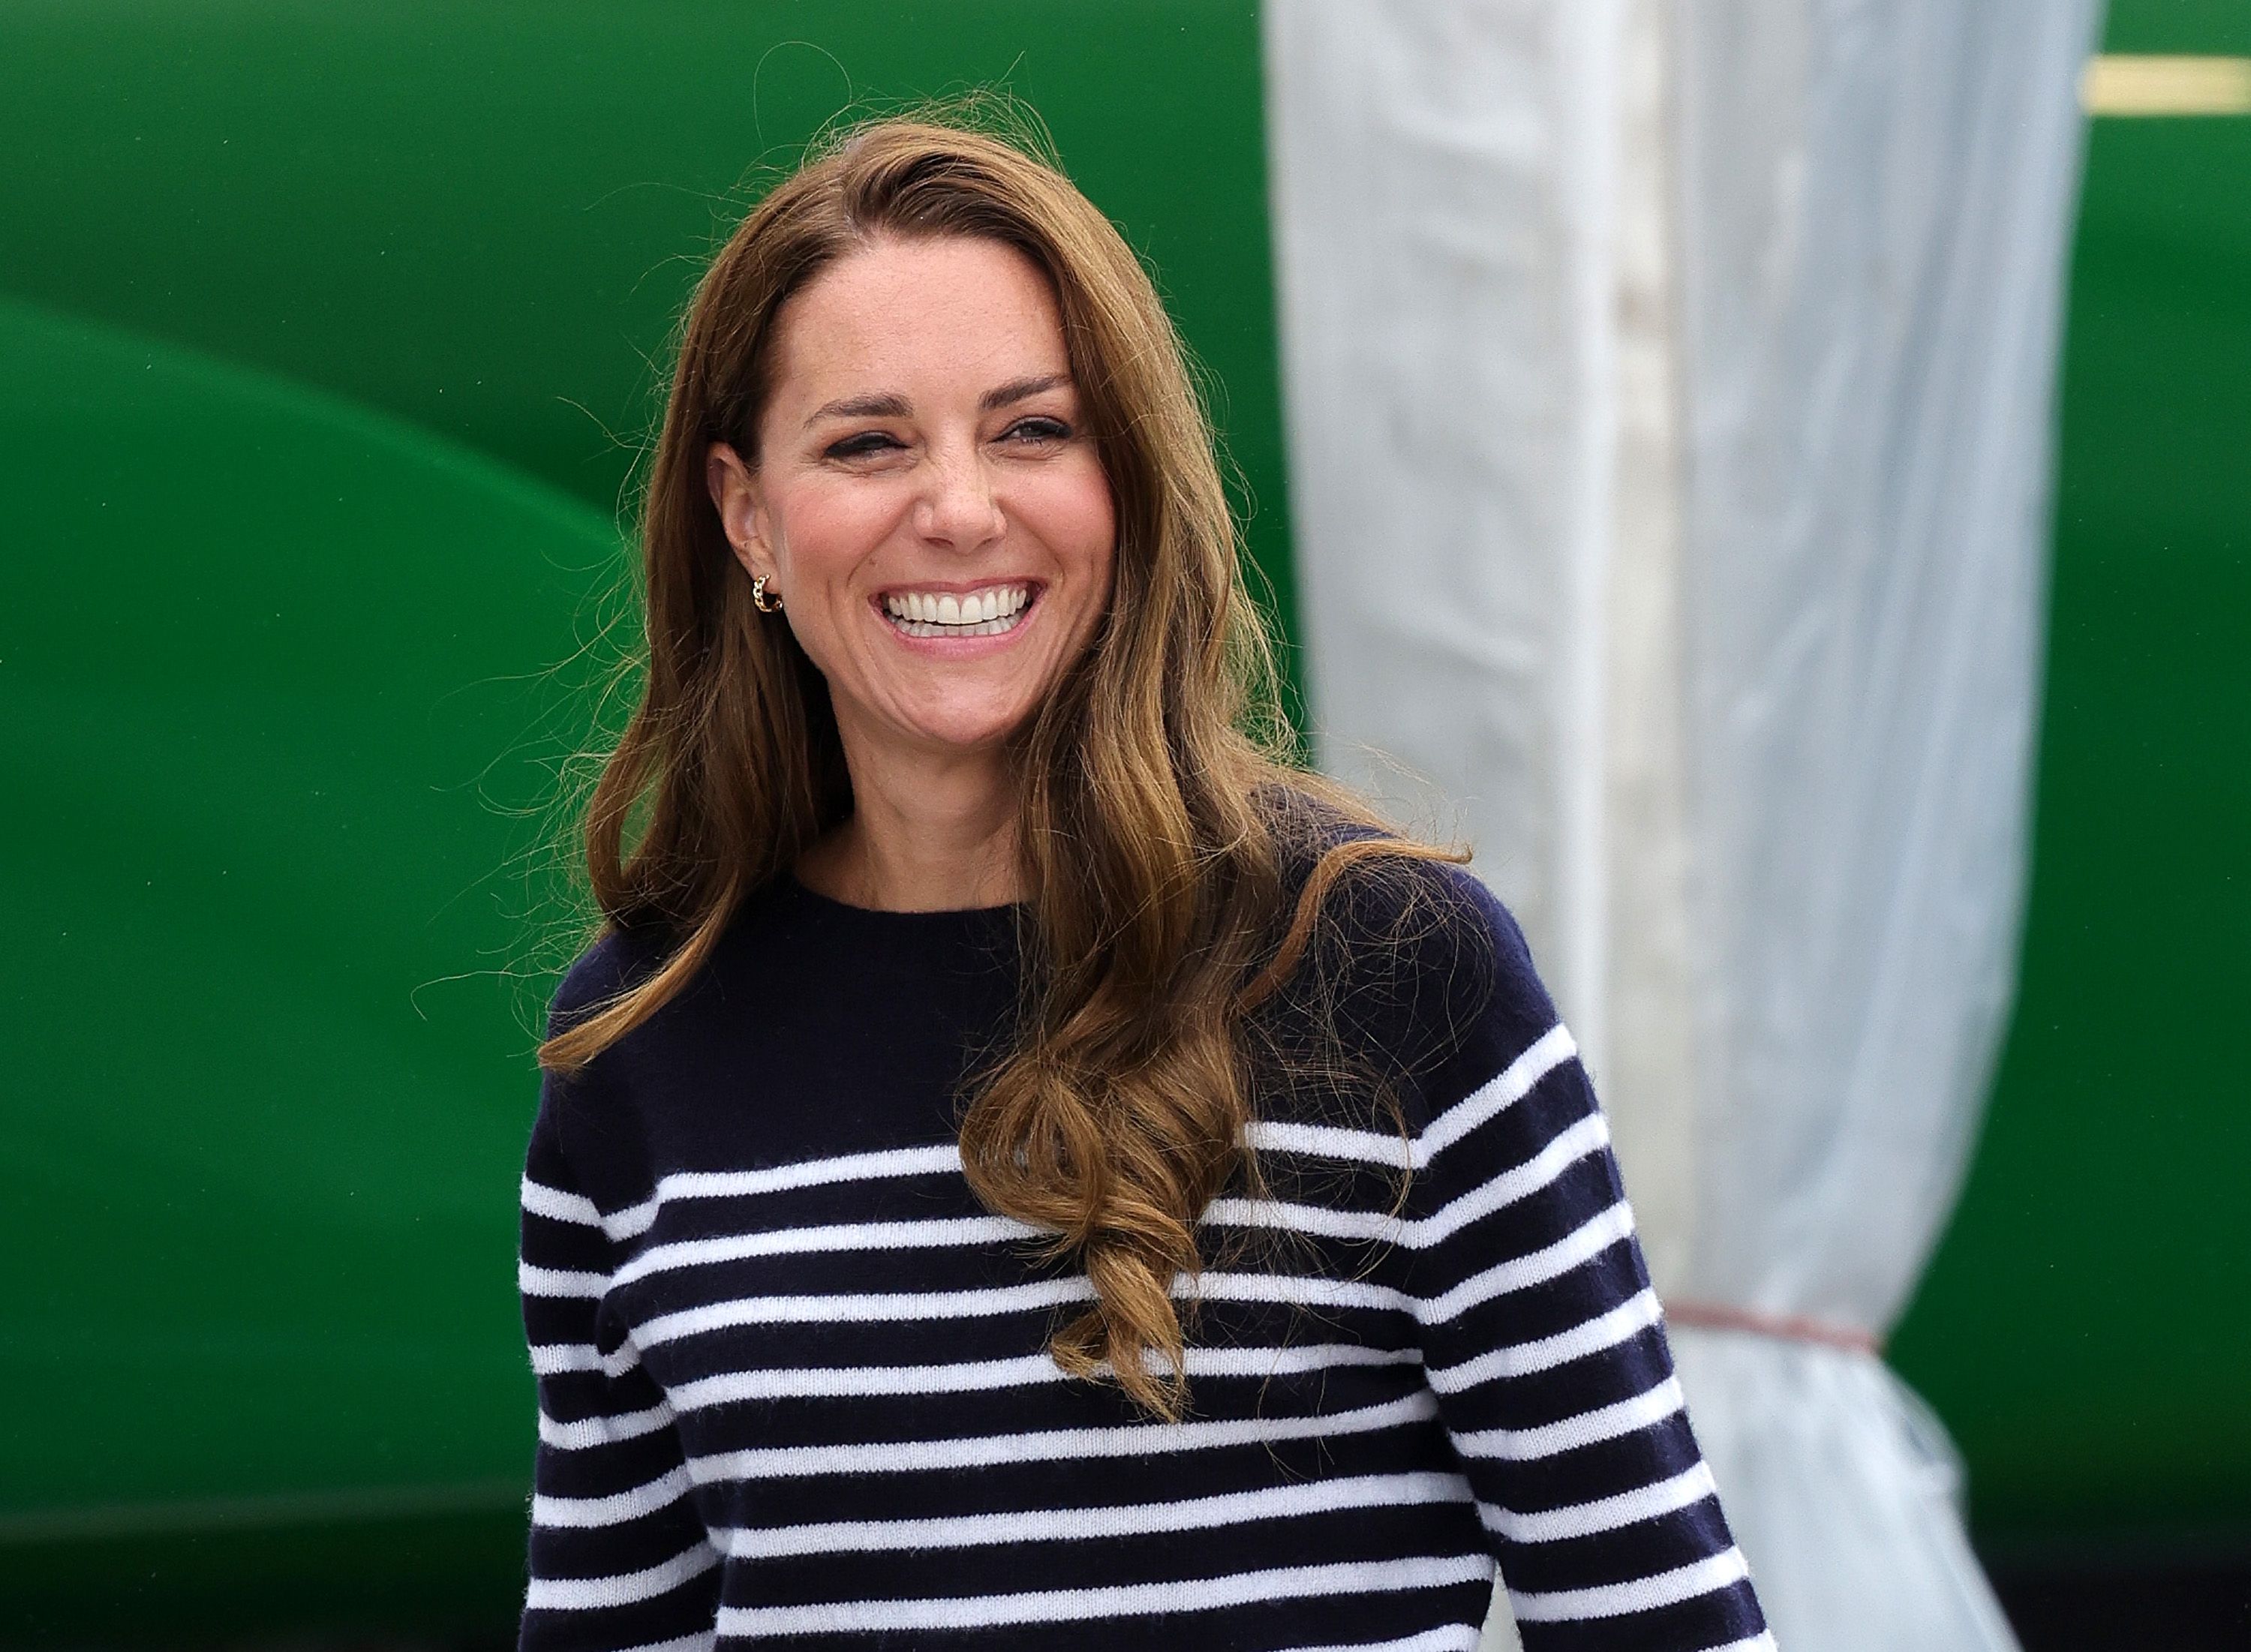 Kate Middleton Wore a Striped Shirt and a Racing Kit for the the